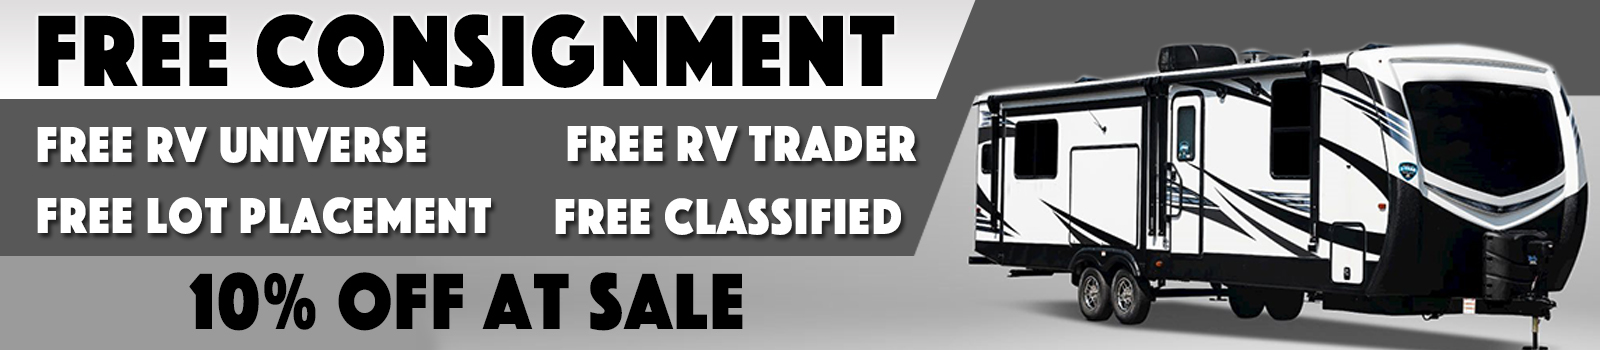 Free Consignment